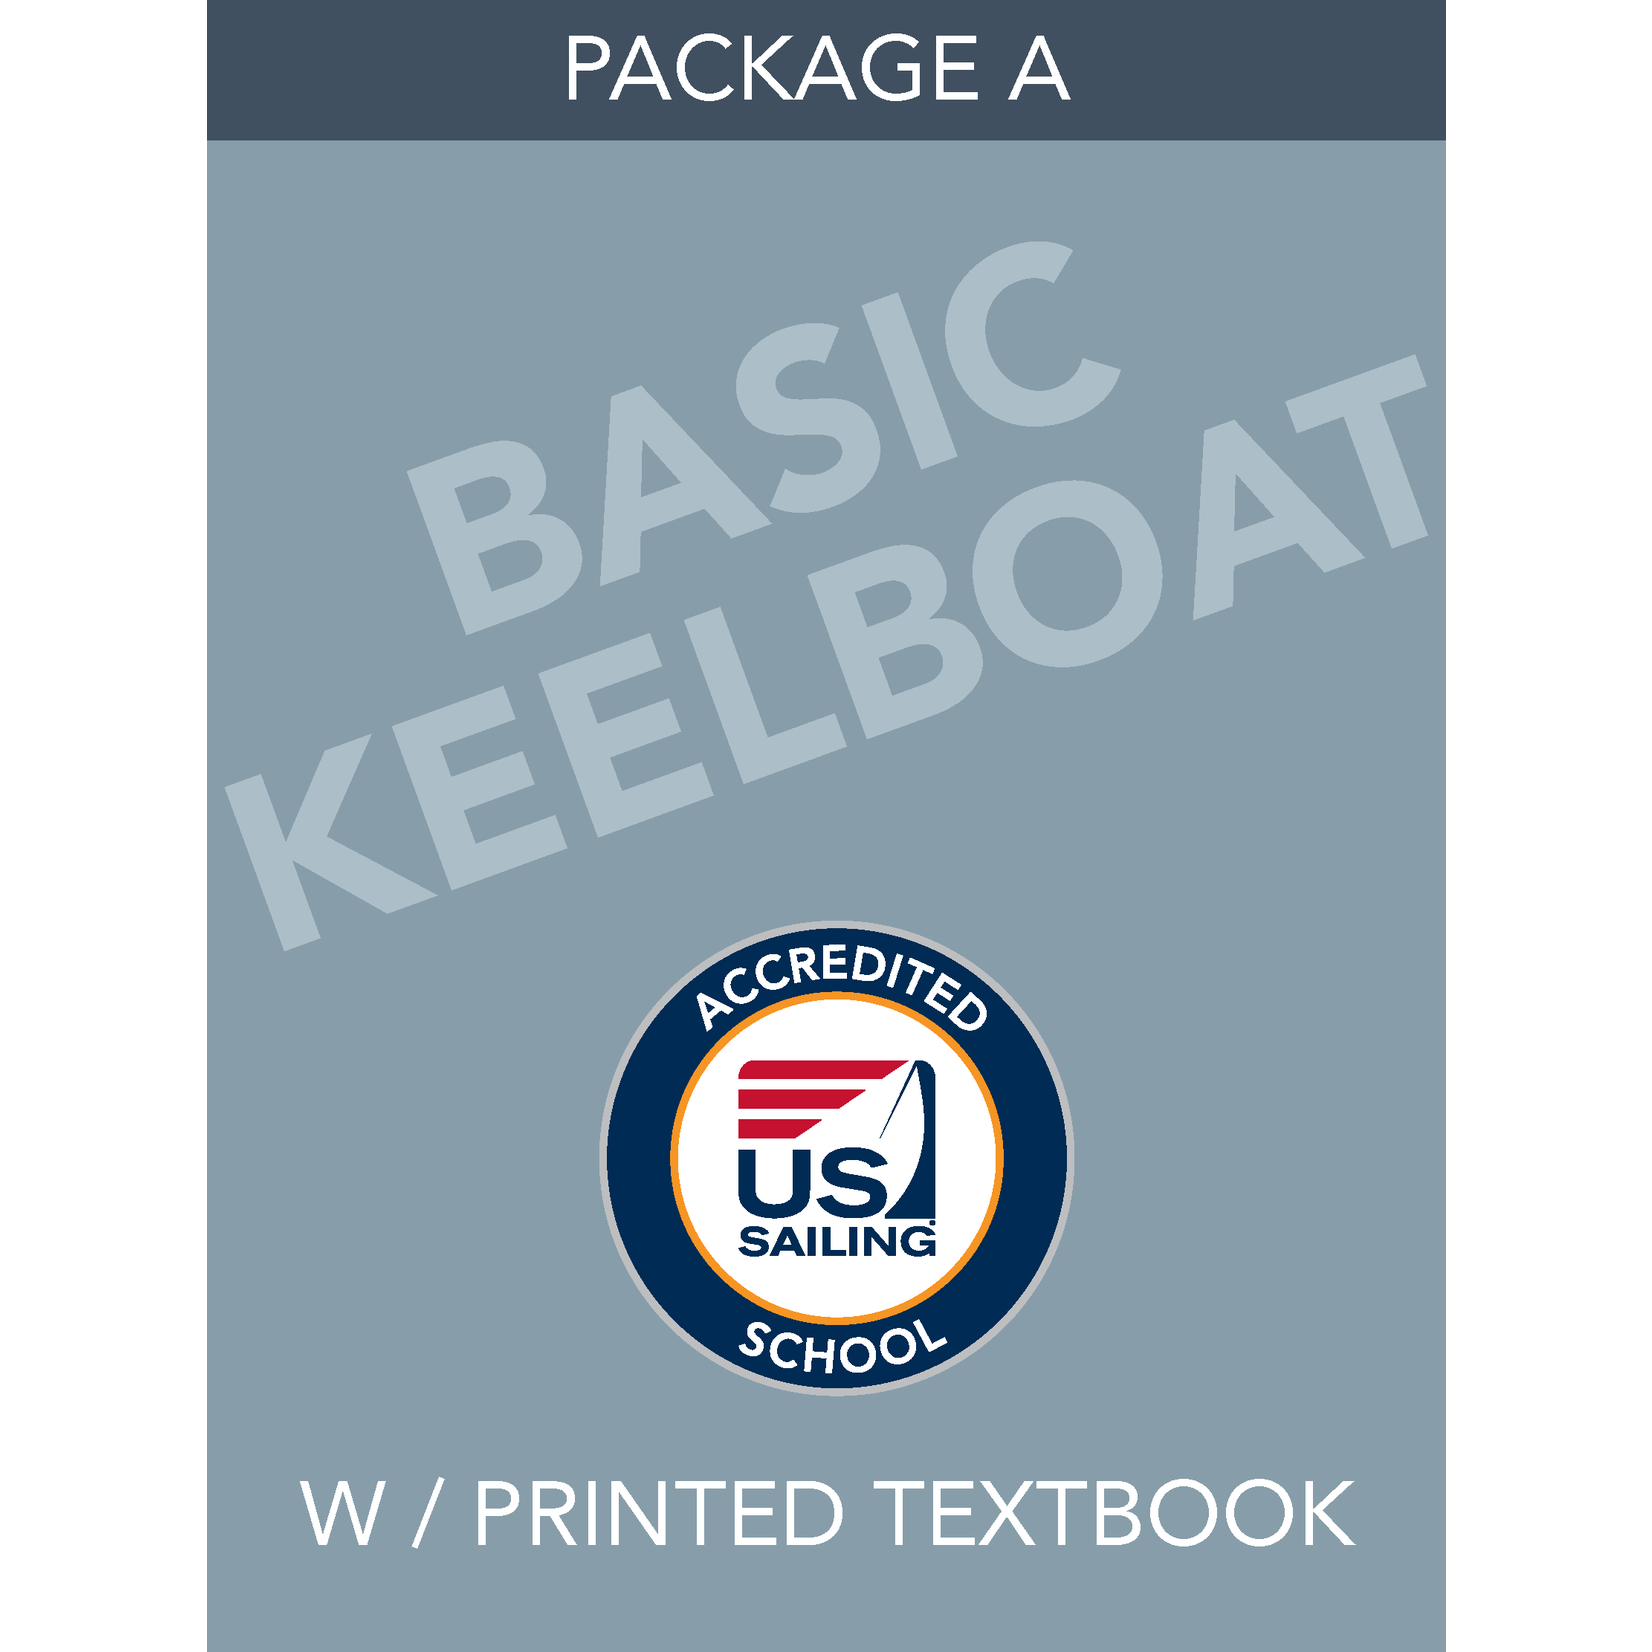 PACKAGE Package A- Basic Keelboat